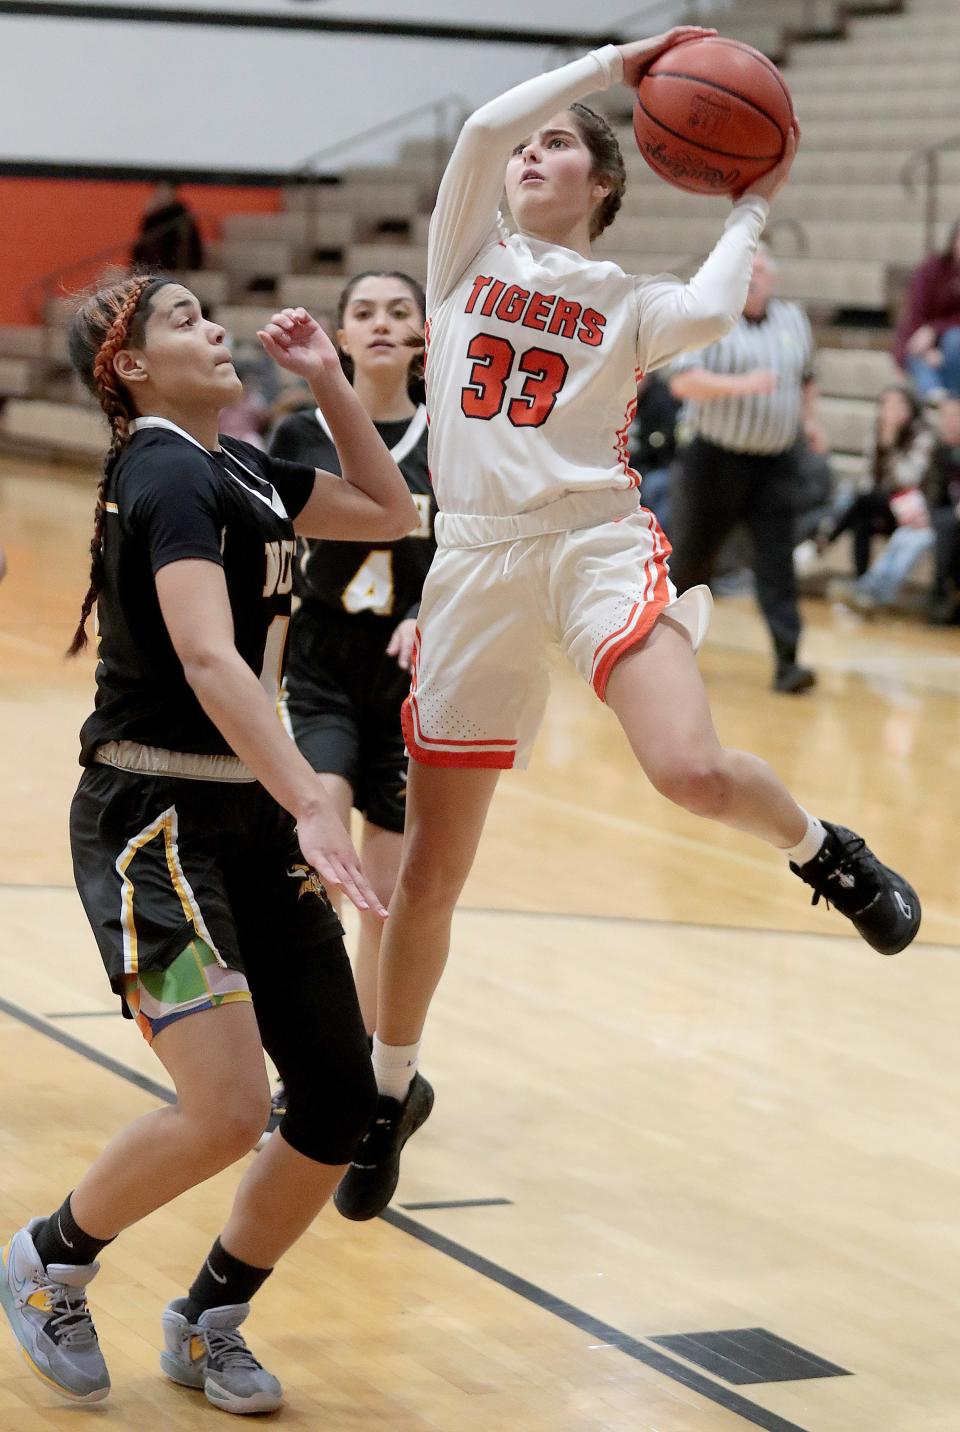 Massillon's Hanna Nicola looks to shoot with pressure from Akron North's Ce'Airah Underwood in the second half of Monday's game.